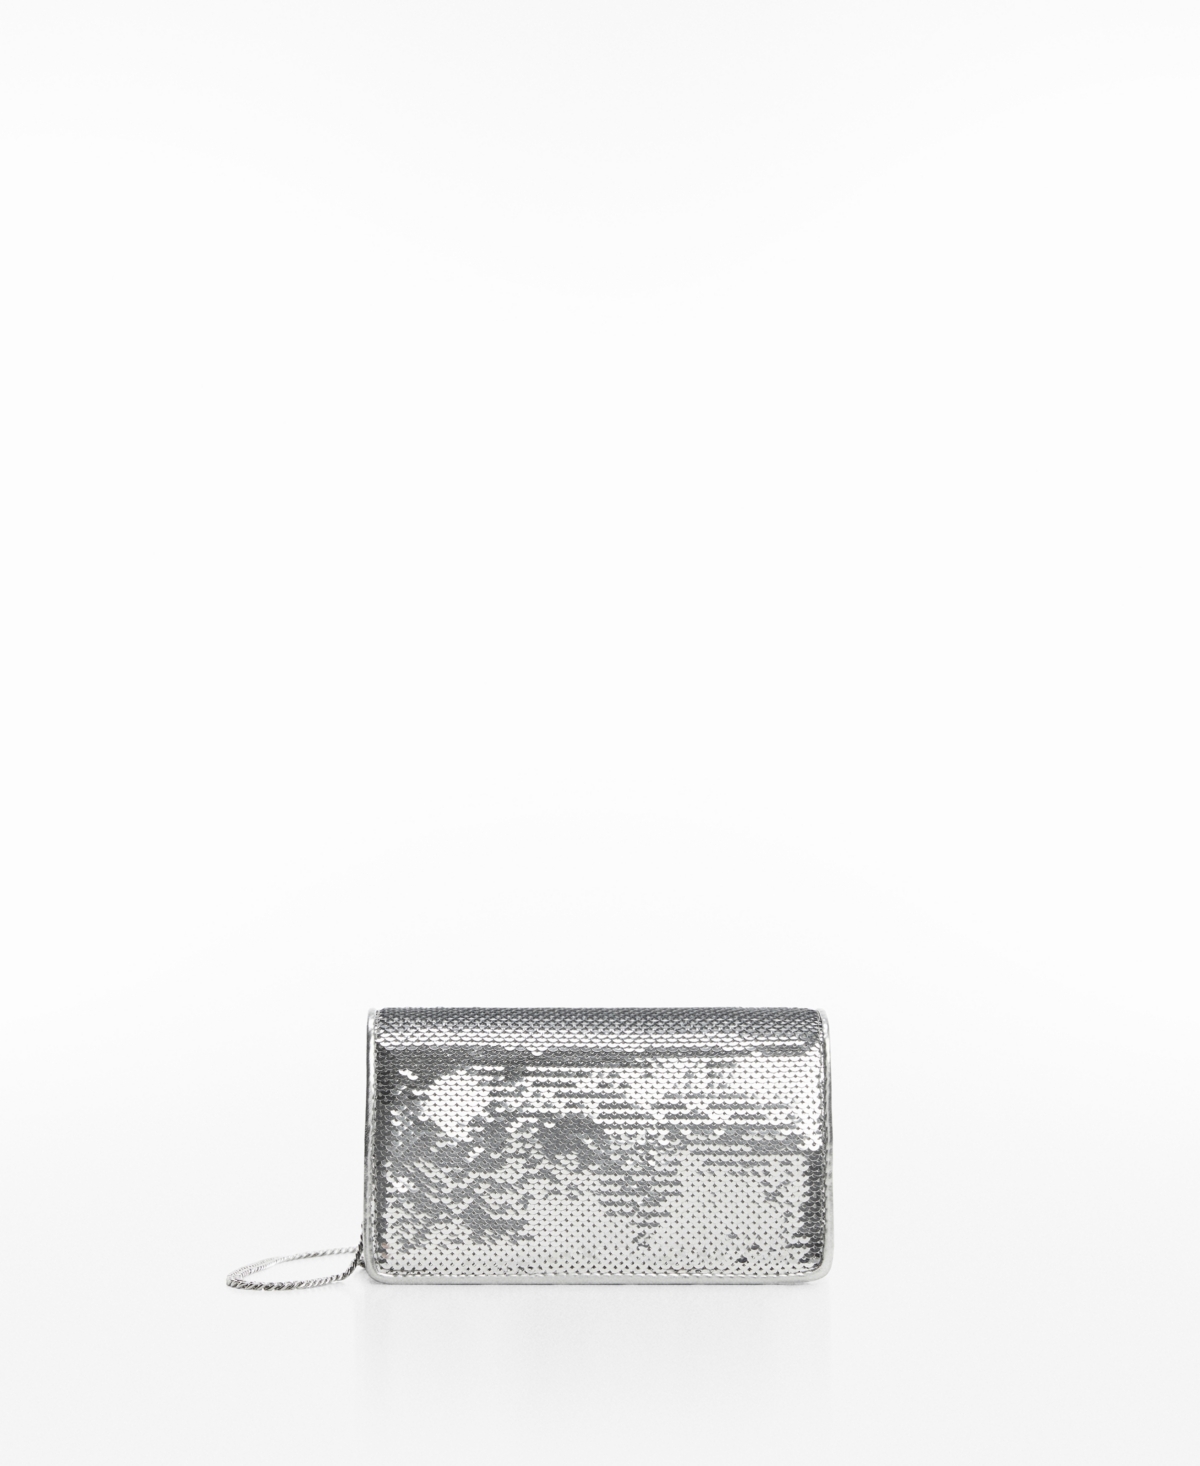 Mango Women's Sequined Chain Bag In Silver